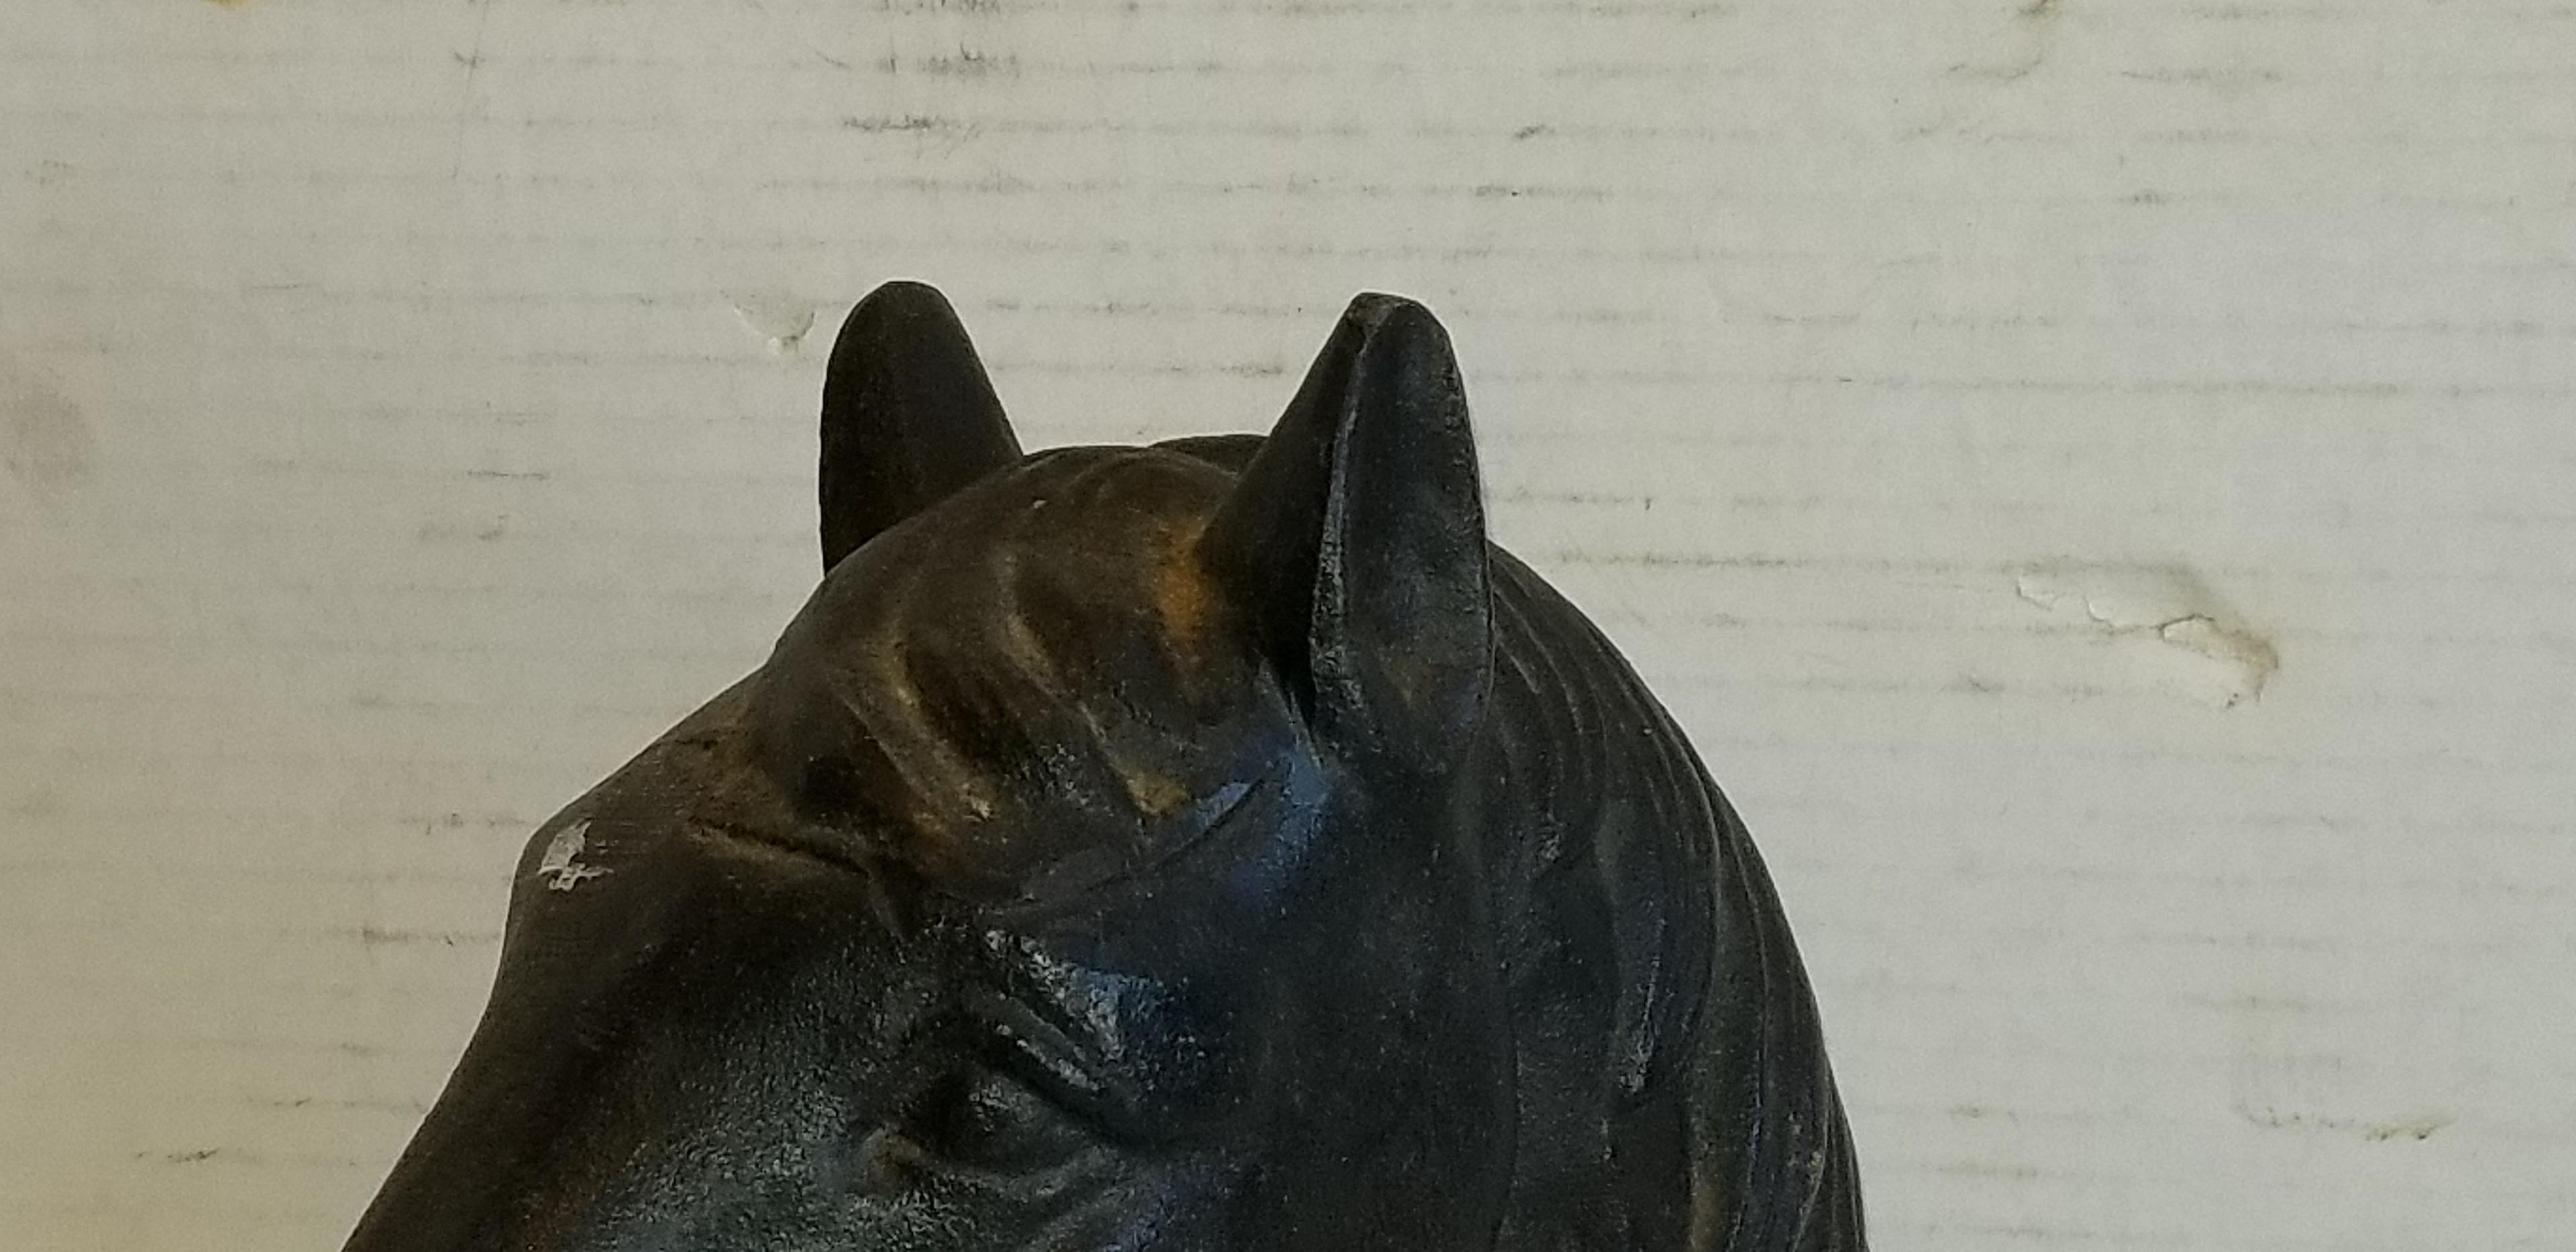 CAST IRON HORSE HEAD HITCHING POST TOPPER